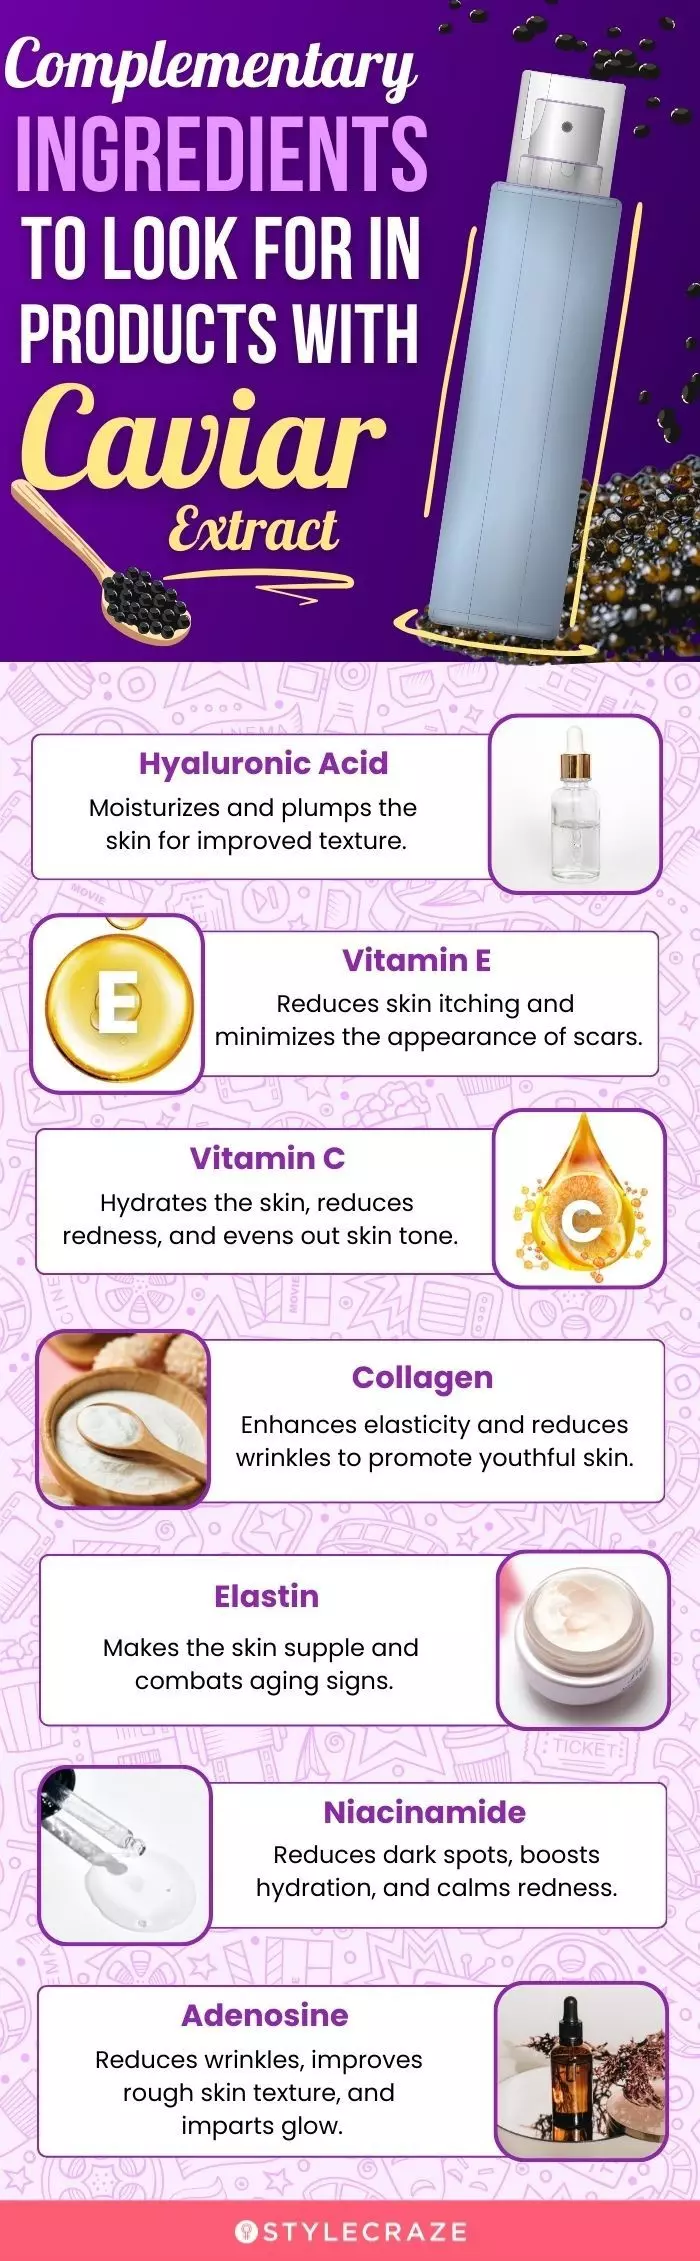 Complementary Ingredients To Look For In Products With Caviar Extract (infographic)